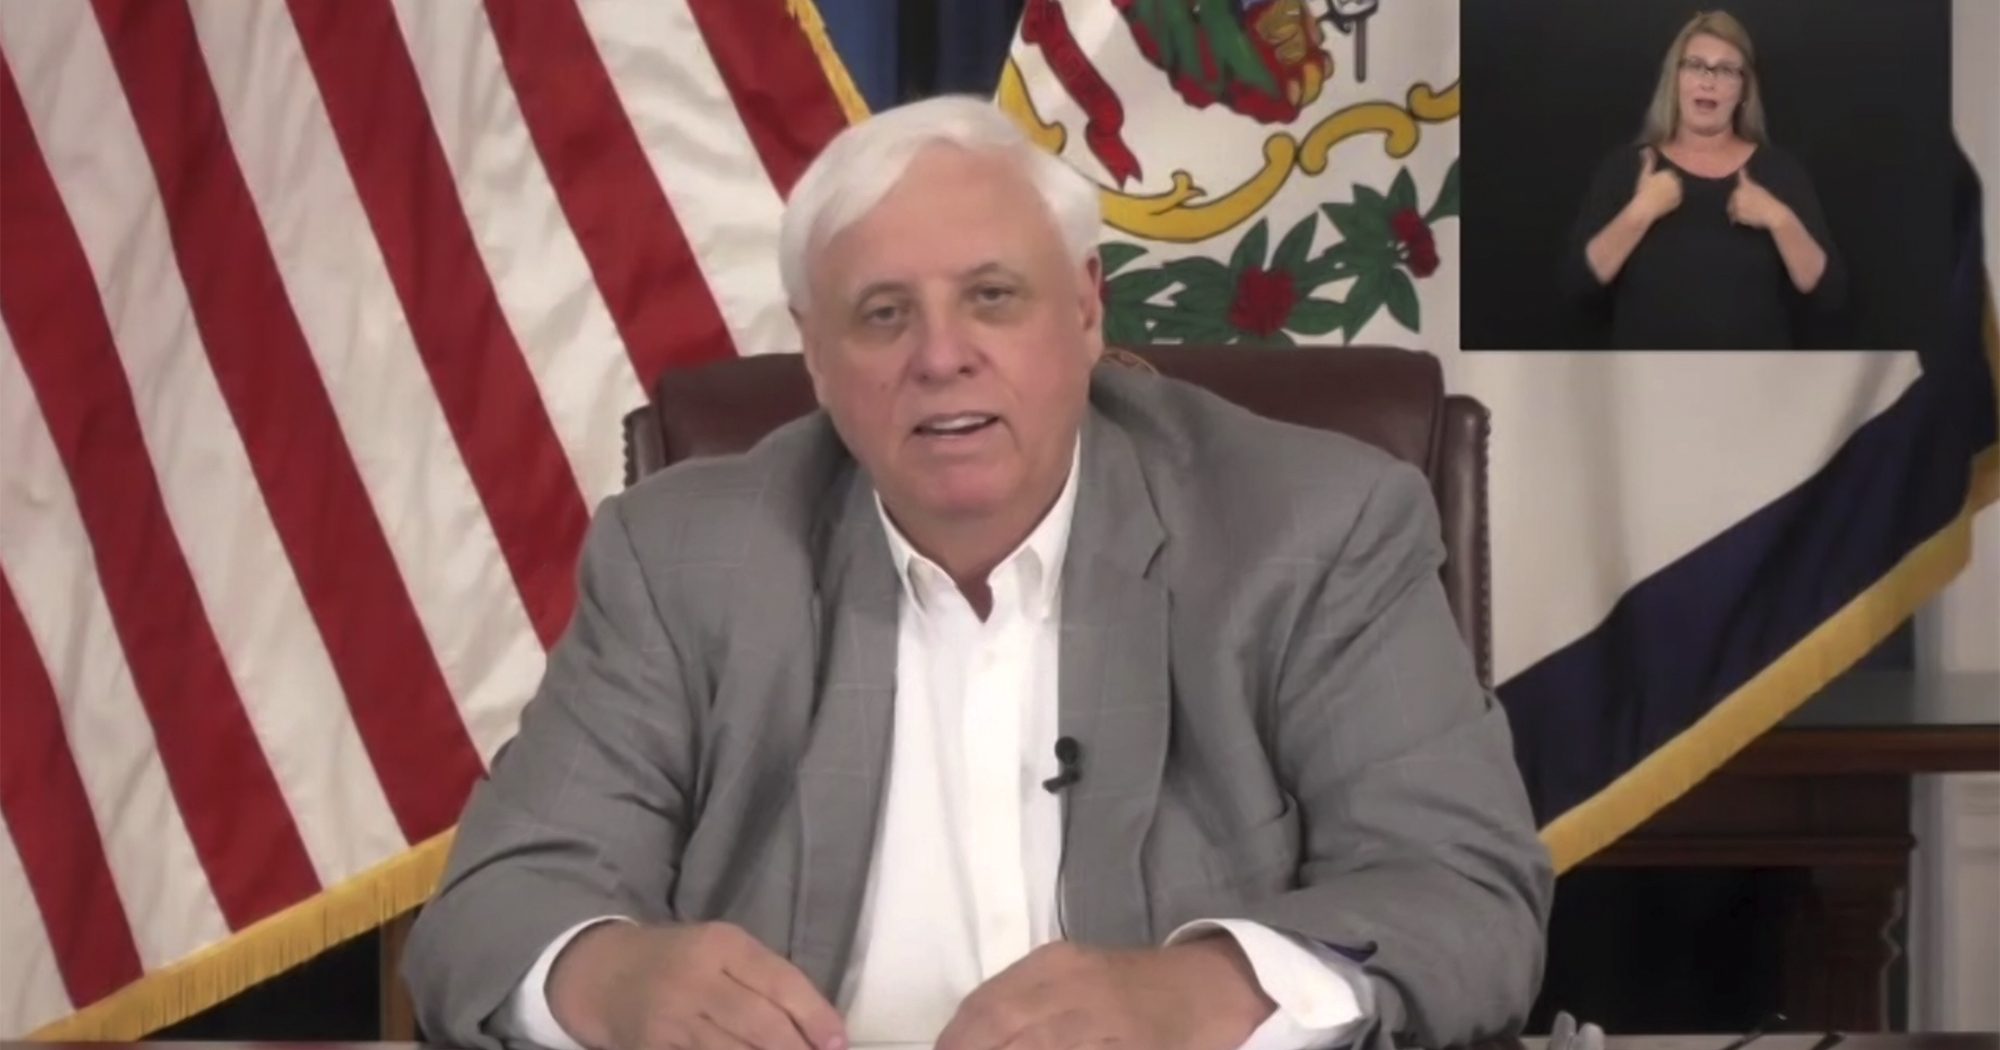 In this image provided by the West Virginia governor's office, Gov. Jim Justice holds a news conference regarding the COVID-19 pandemic on May 29, 2020, in Charleston, West Virginia.